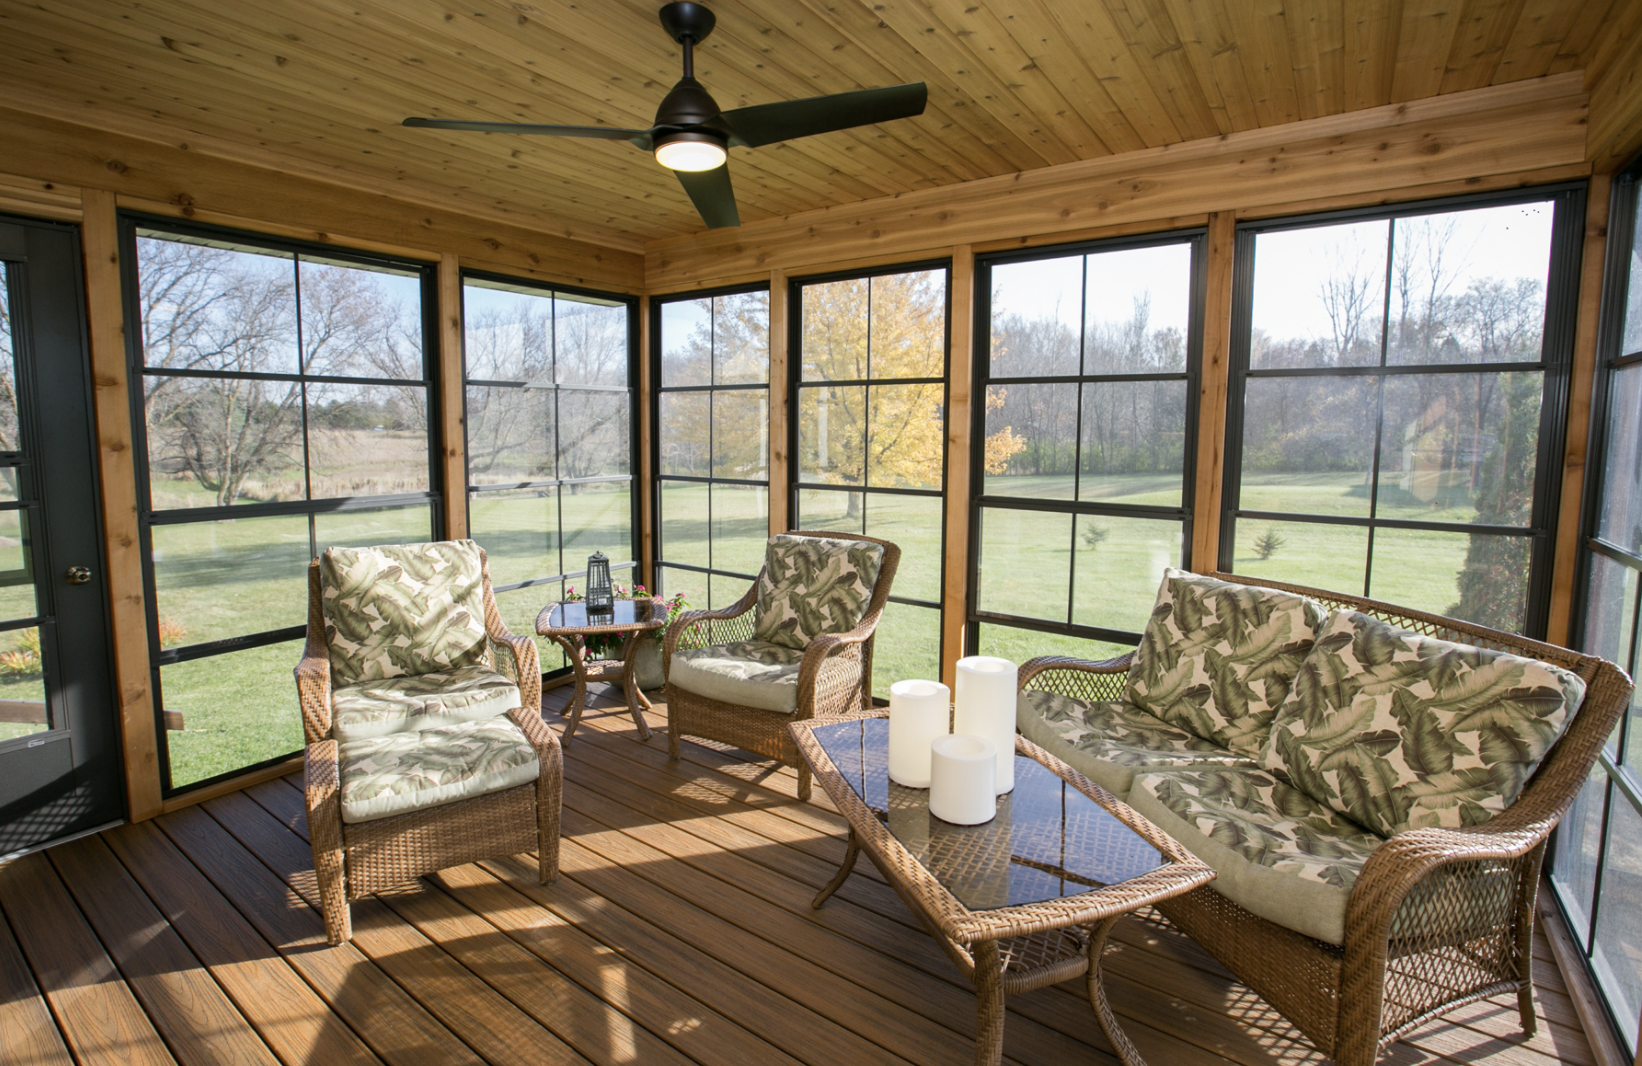 A sunroom or sun parlor is a place to relax and let the sun do the rest. J.G. Hause Construction, Inc Oakdale (651)439-0189